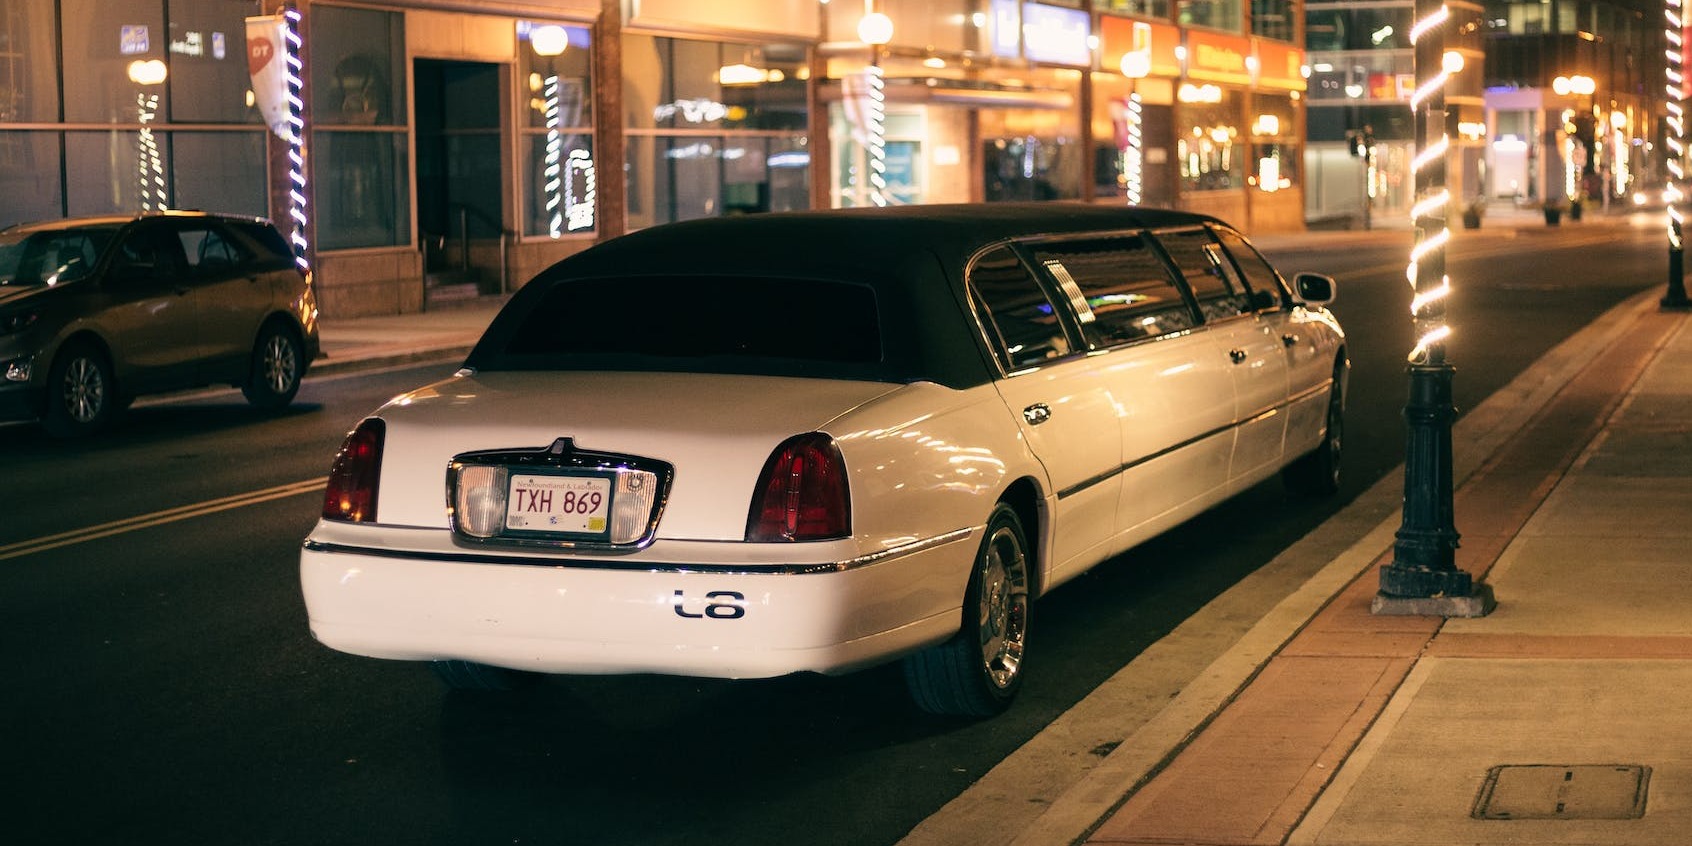 What Are the Legal Requirements for Limo Hire in the UK?